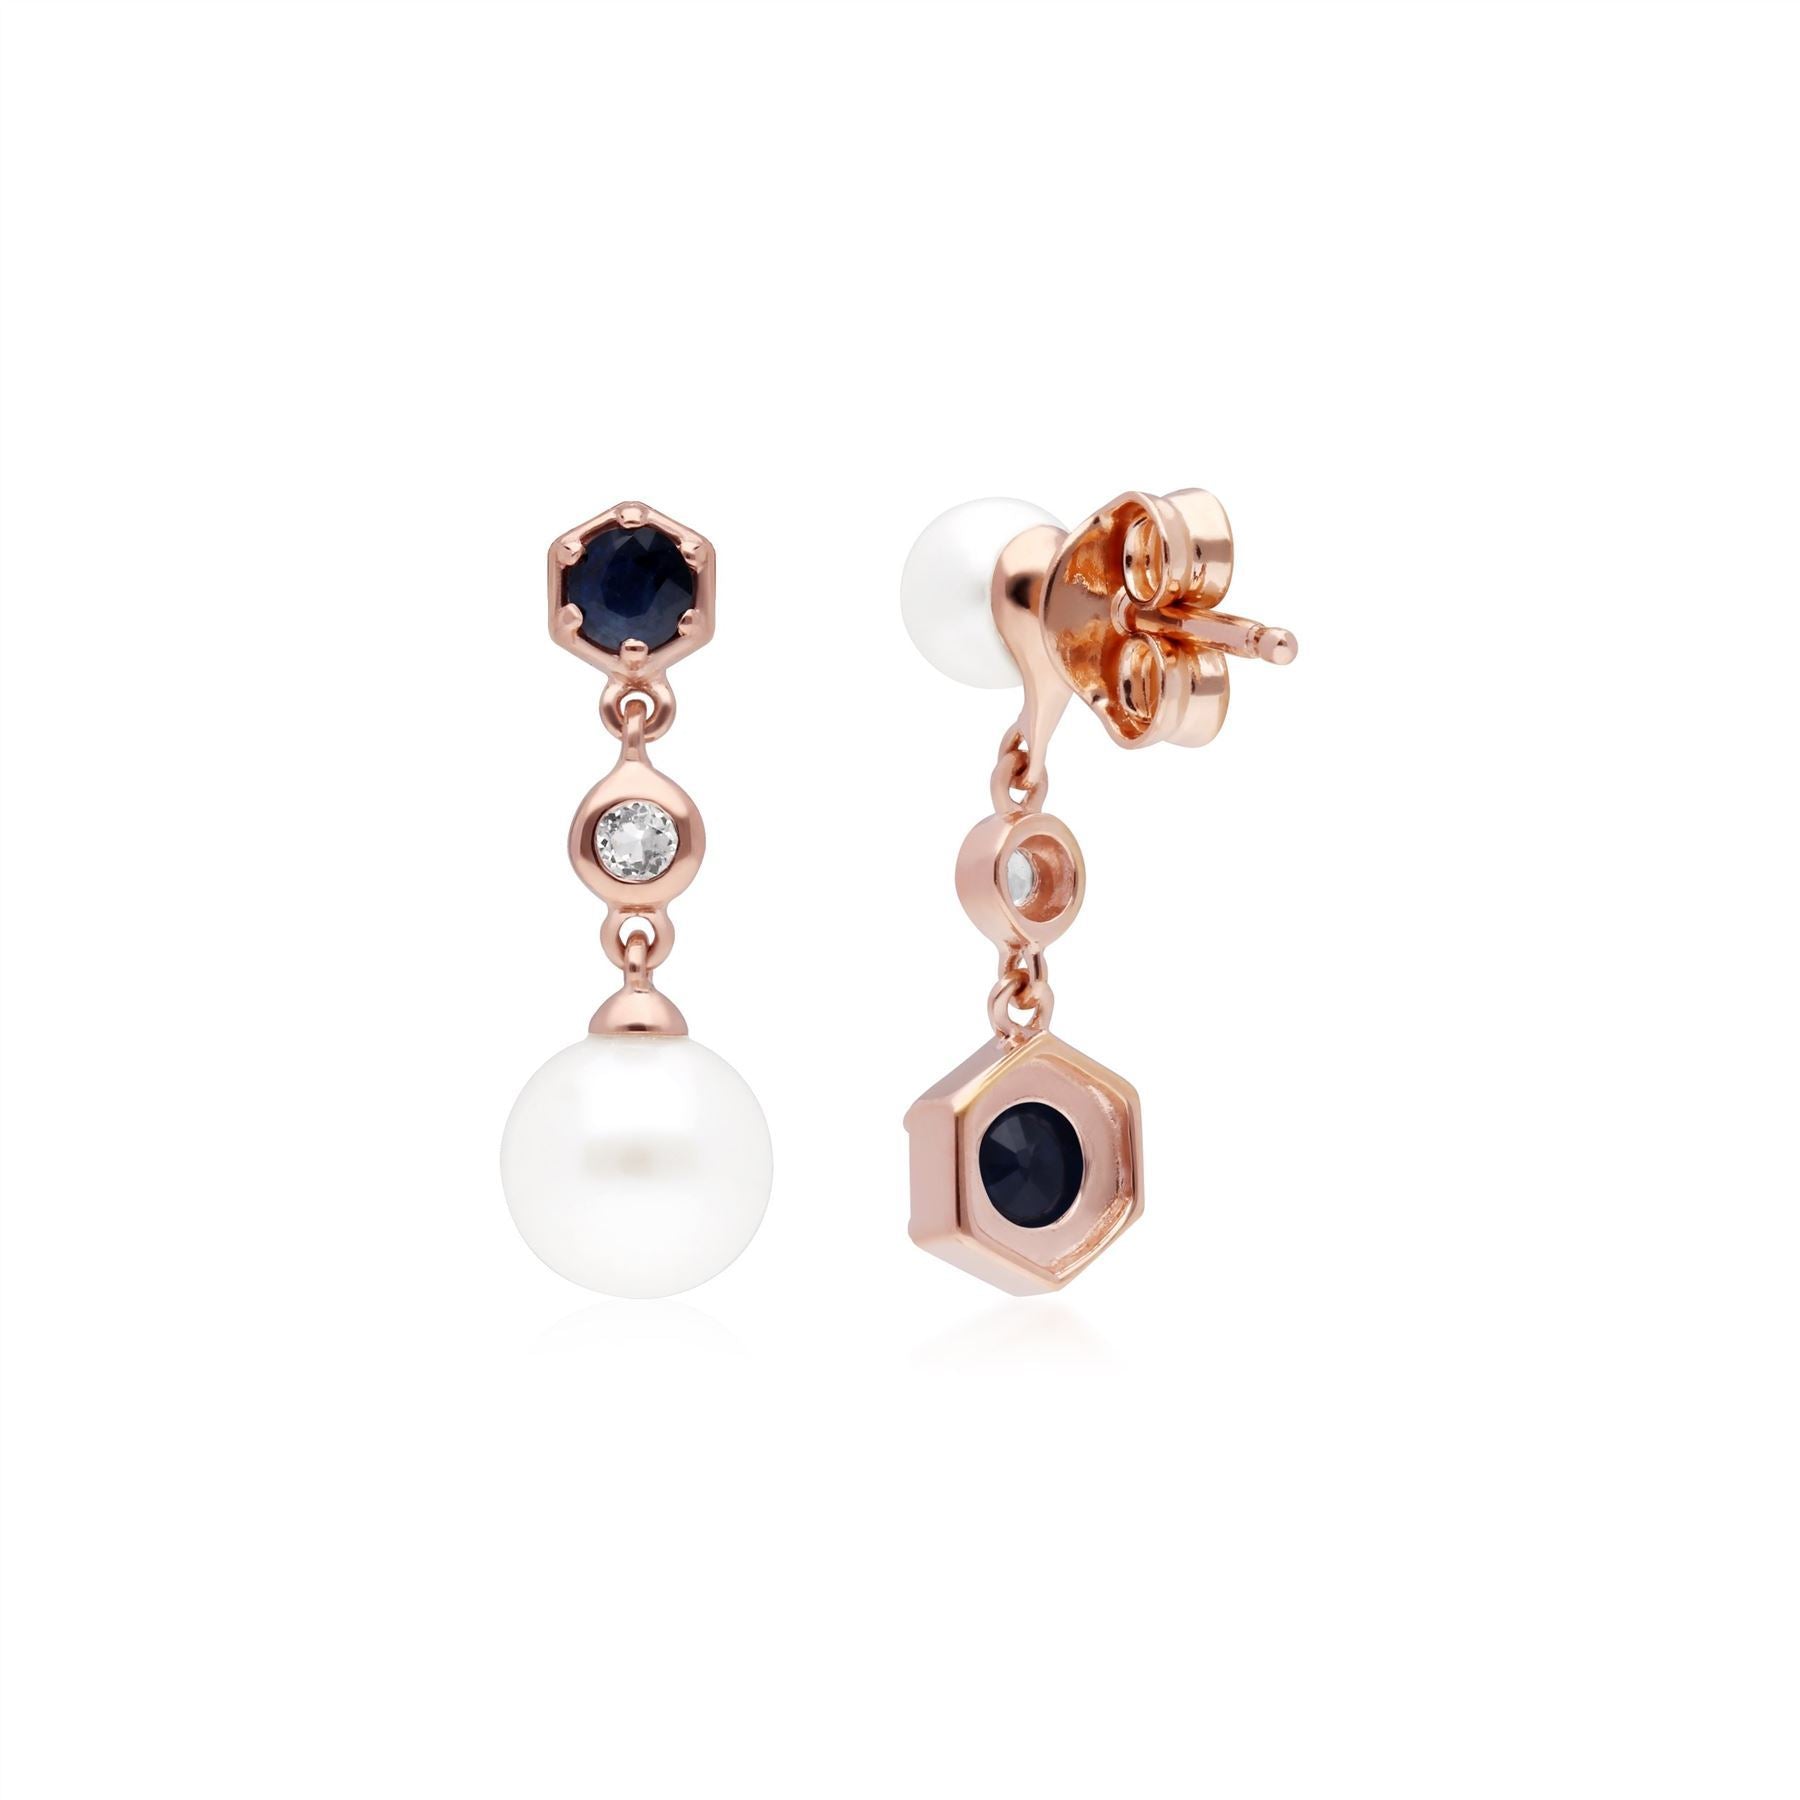 Modern Pearl, Sapphire & Topaz Mismatched Drop Earrings in Rose Gold Plated Sterling Silver Back